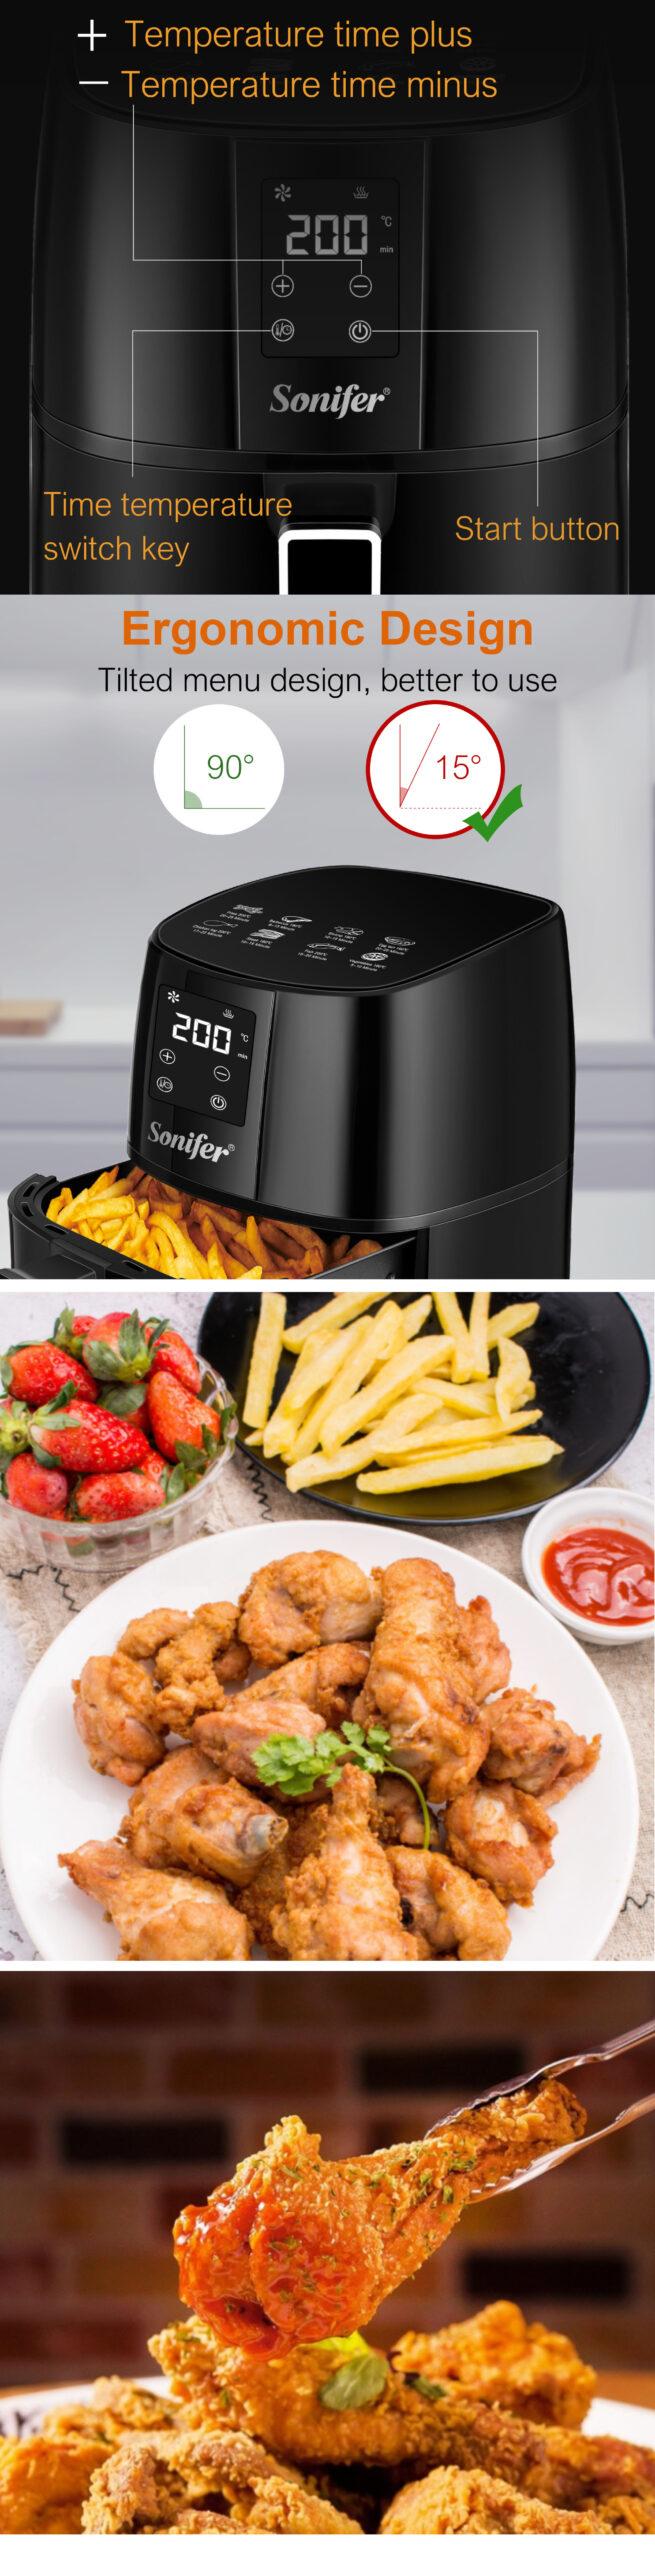 Sonifer 4.2L Air Fryer Without Oil Oven 360°Baking LED Touchscreen Electric Deep Fryer 1400W Nonstick Basket Kitchen Cooking Fry